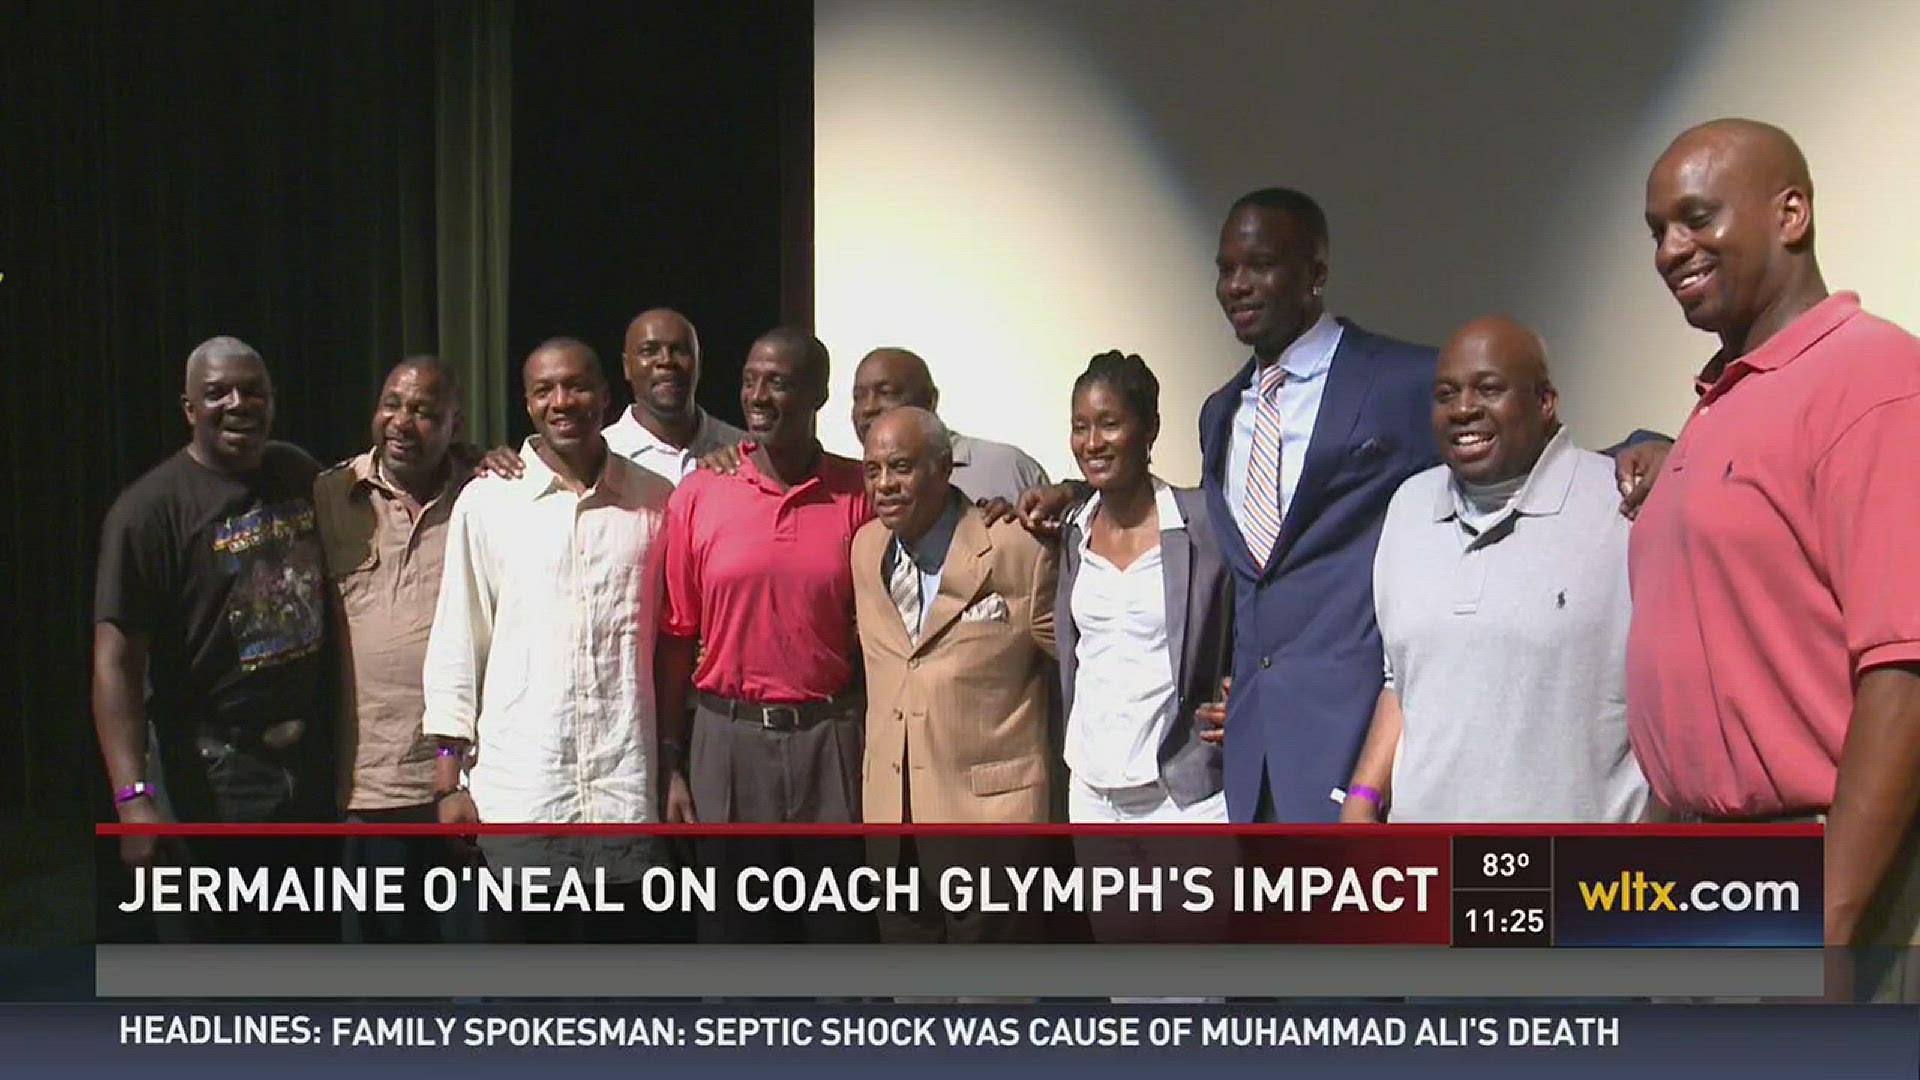 The documentary on former Eau Claire head basketball coach George Glymph was shown to the Eau Claire community Saturday night.